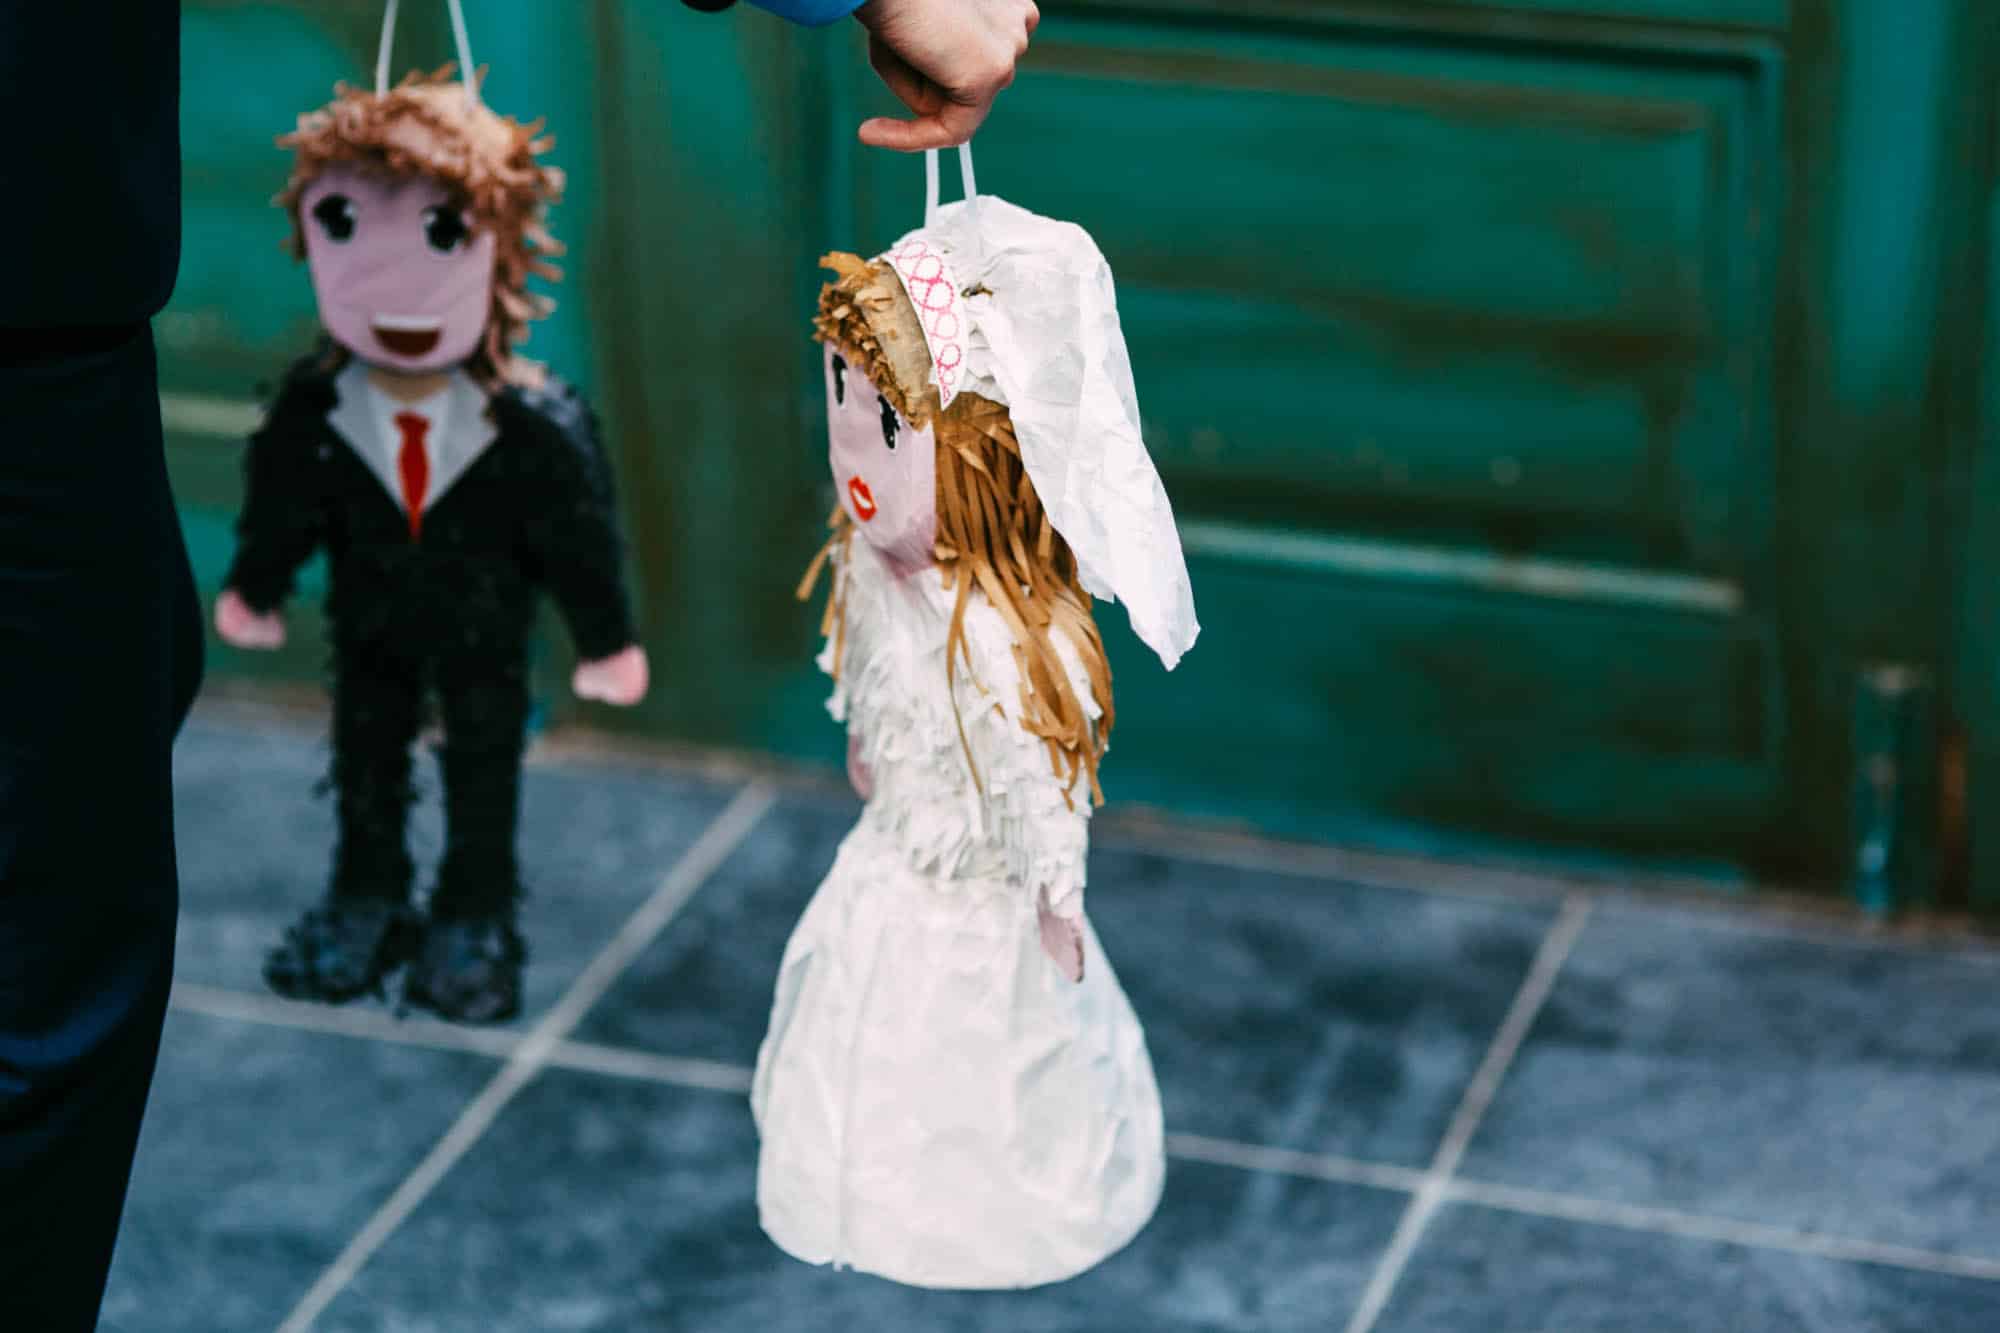 A man plays a marriage game and holds two dolls in front of a door.